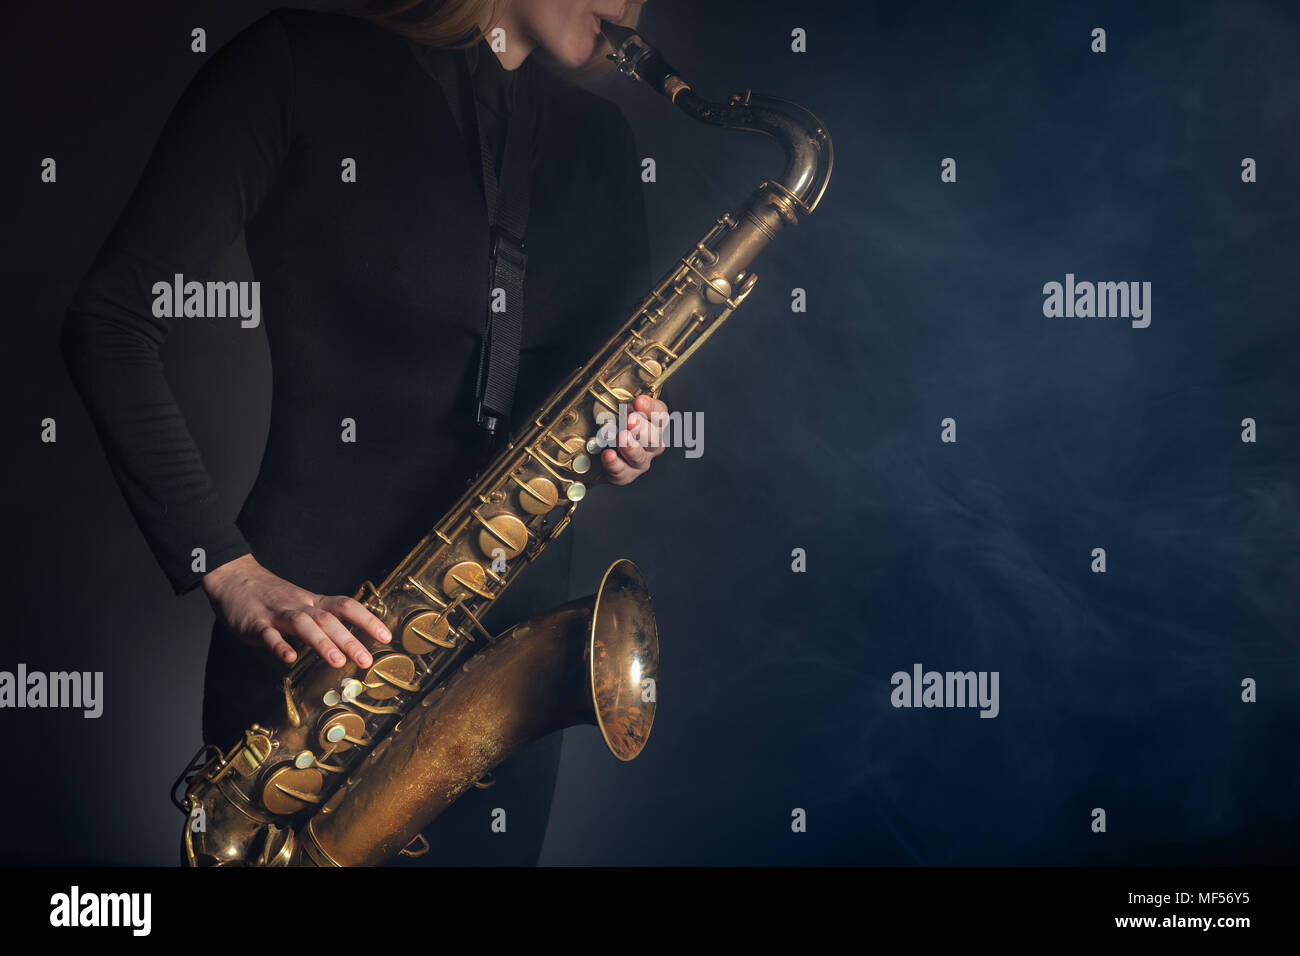 Saxophone player. Woman with saxophone on a dark background Stock Photo